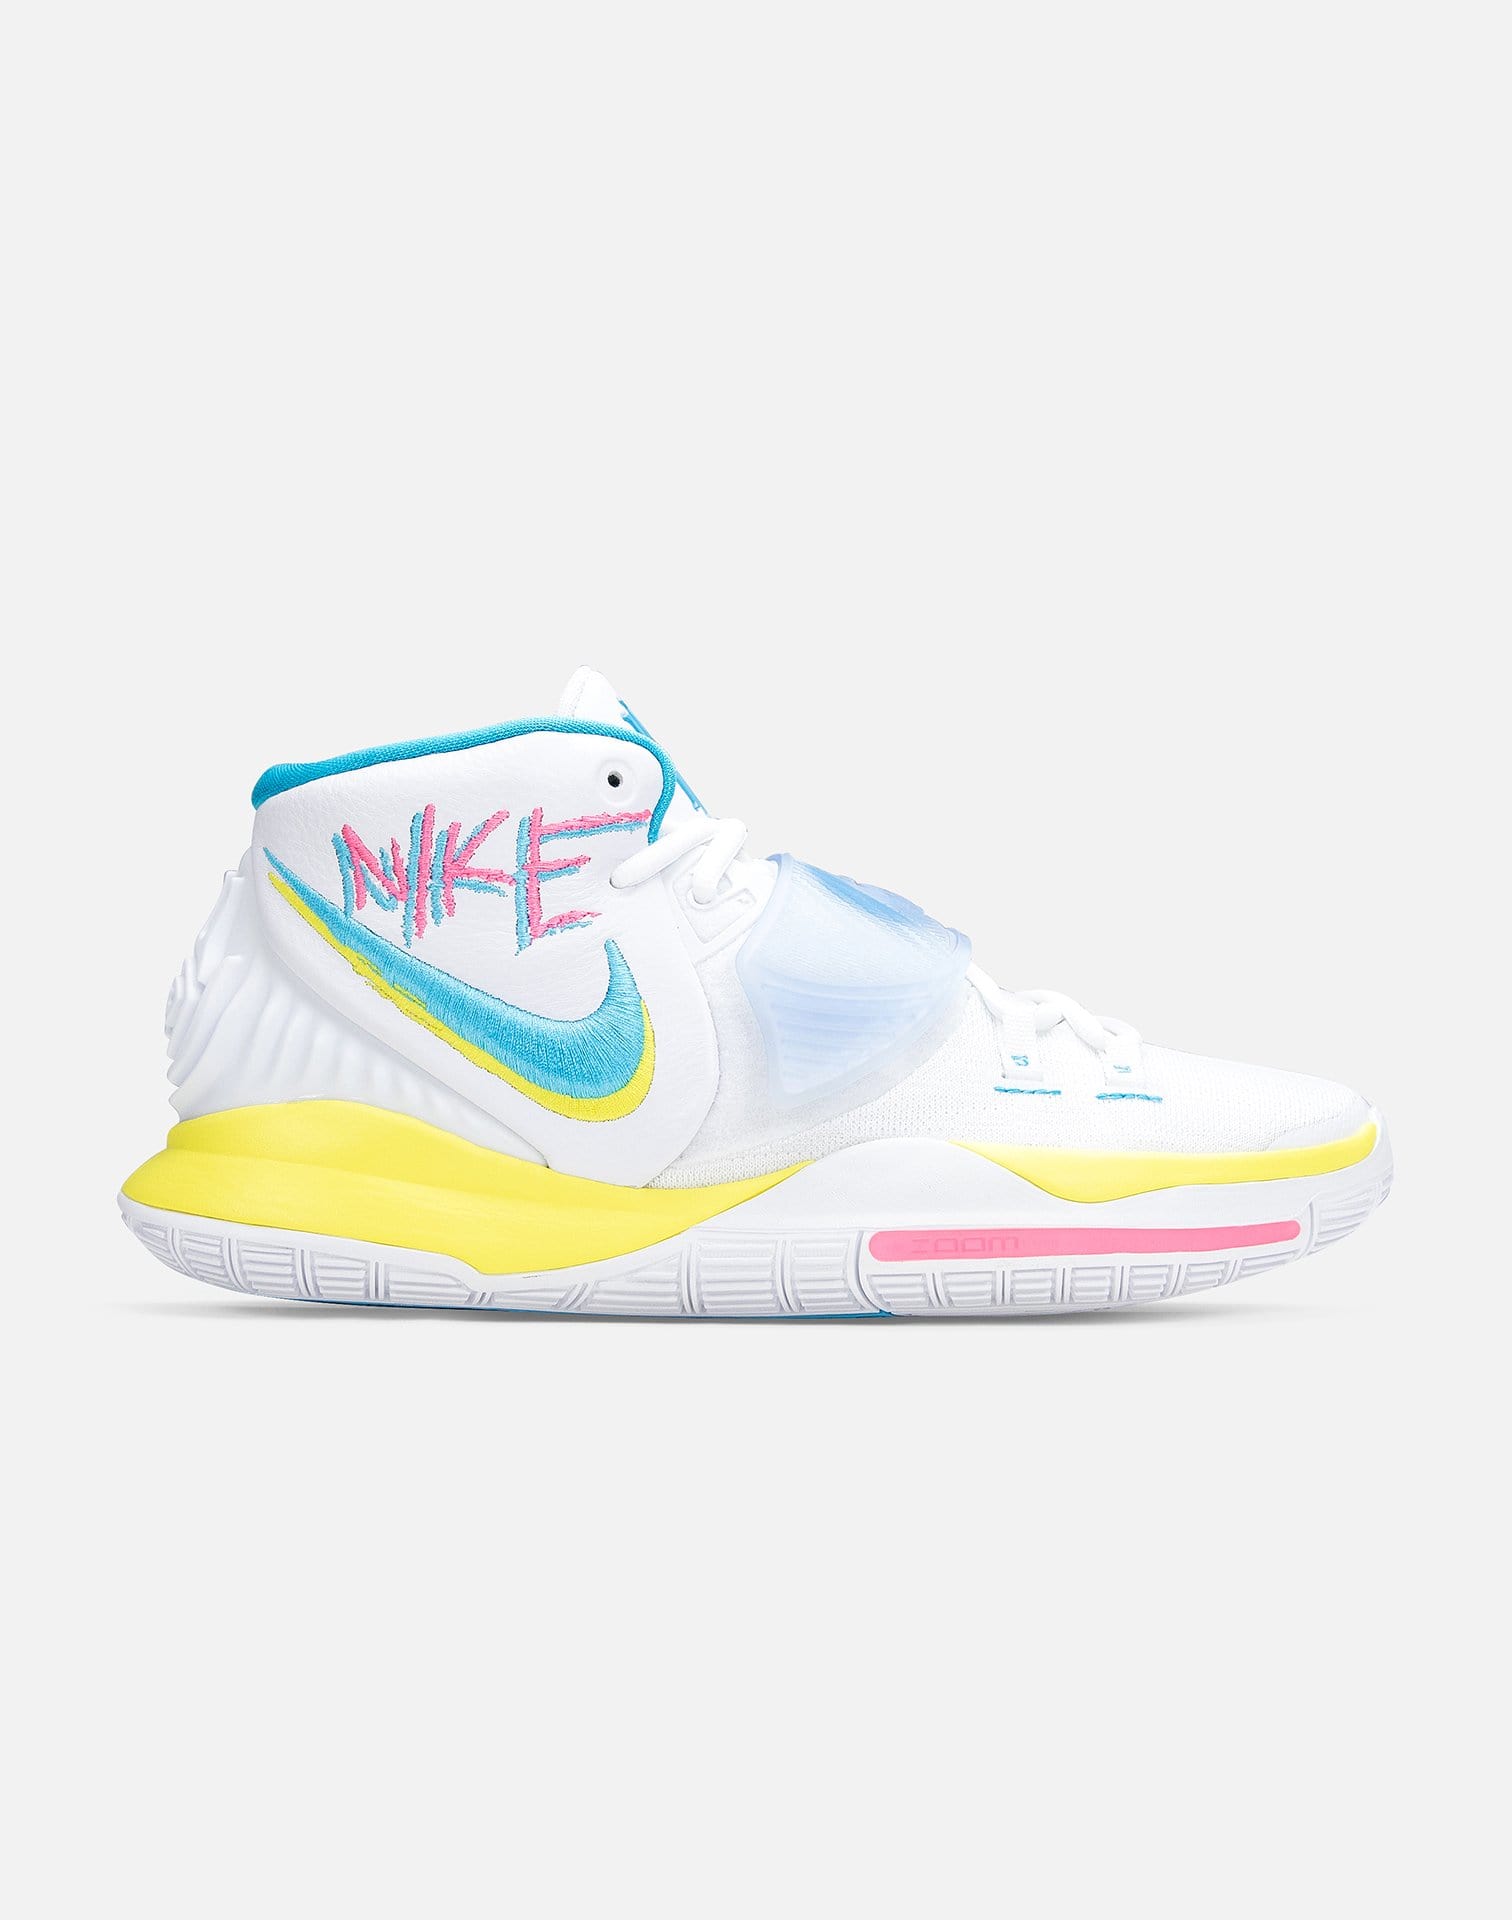 kyrie 6 neon